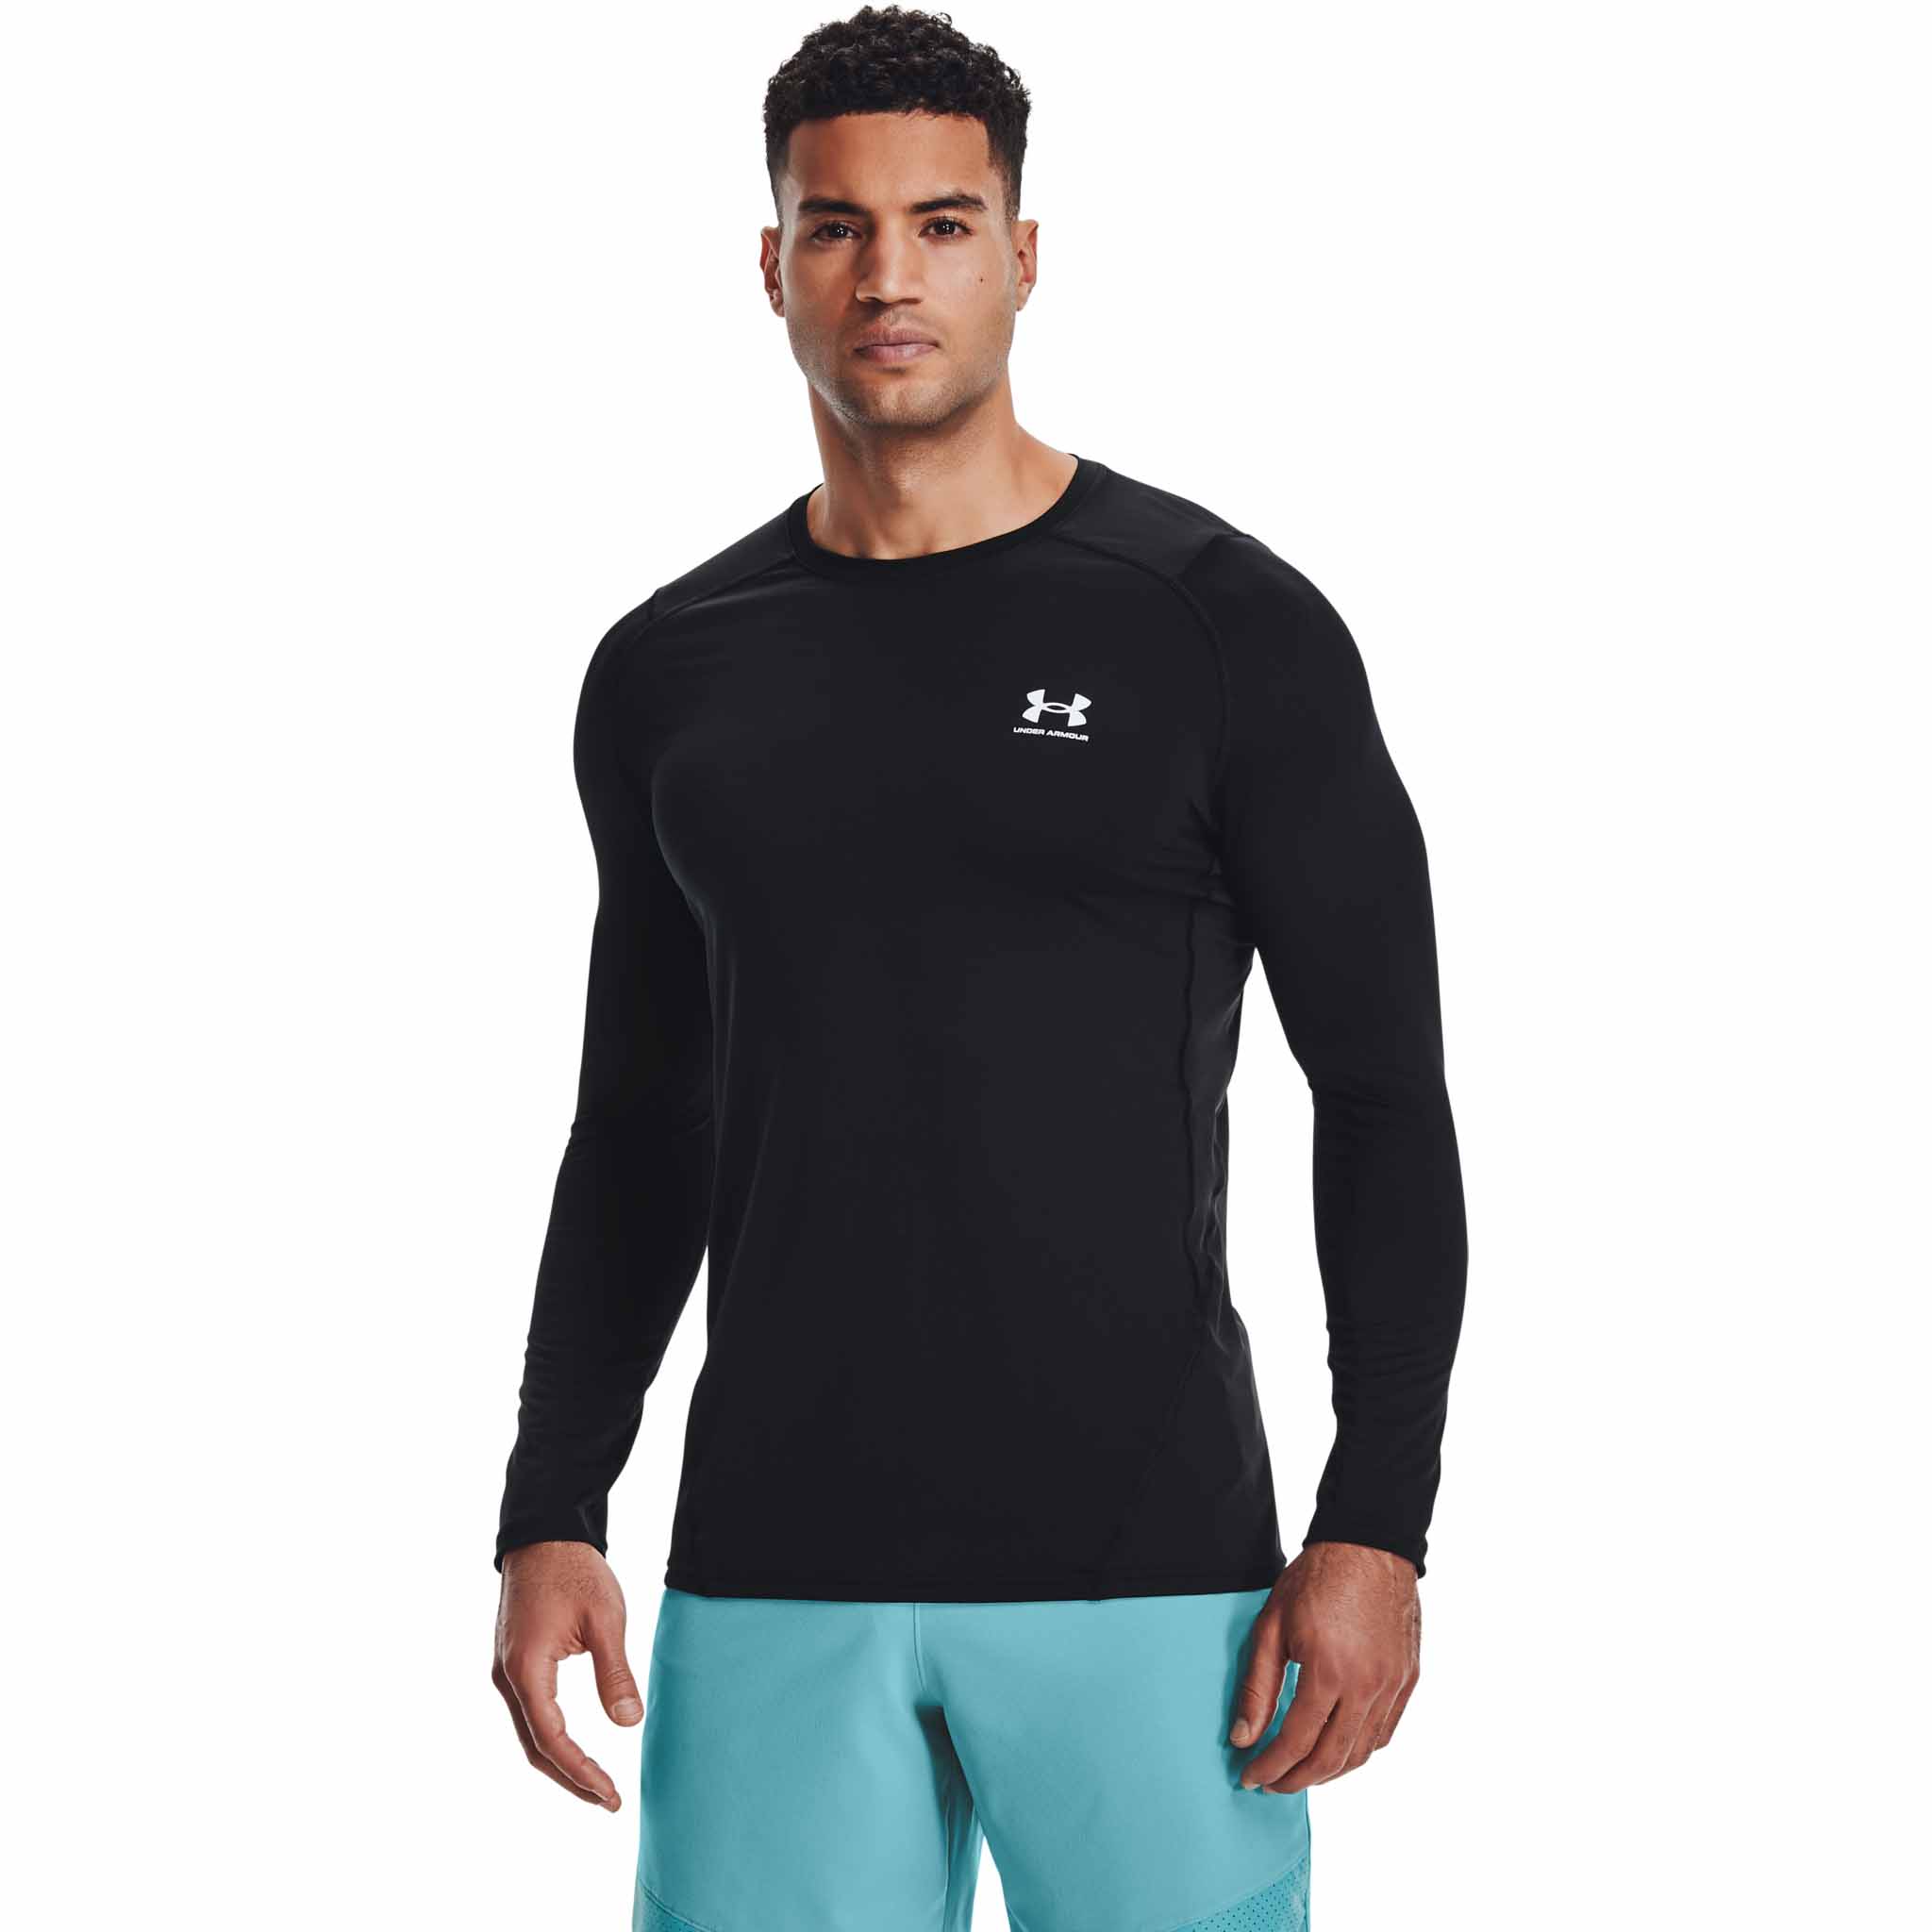 Under Armour HeatGear Armour Fitted - T-shirt à manches courtes hommes -  Soccer Sport Fitness